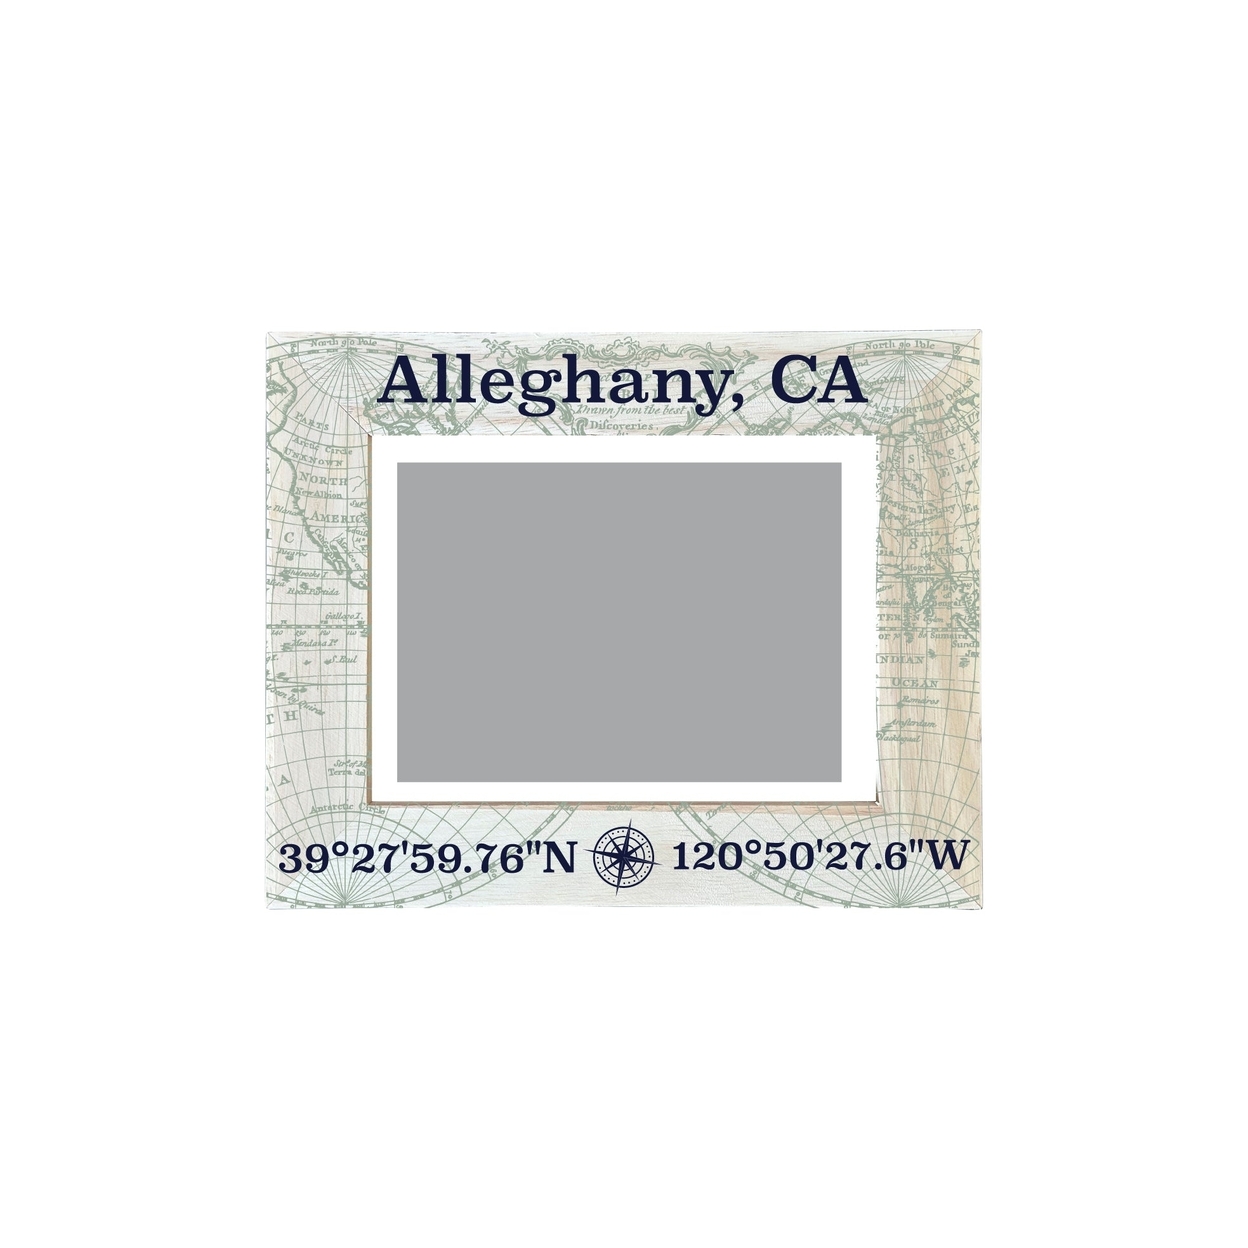 Alleghany California Souvenir Wooden Photo Frame Compass Coordinates Design Matted To 4 X 6